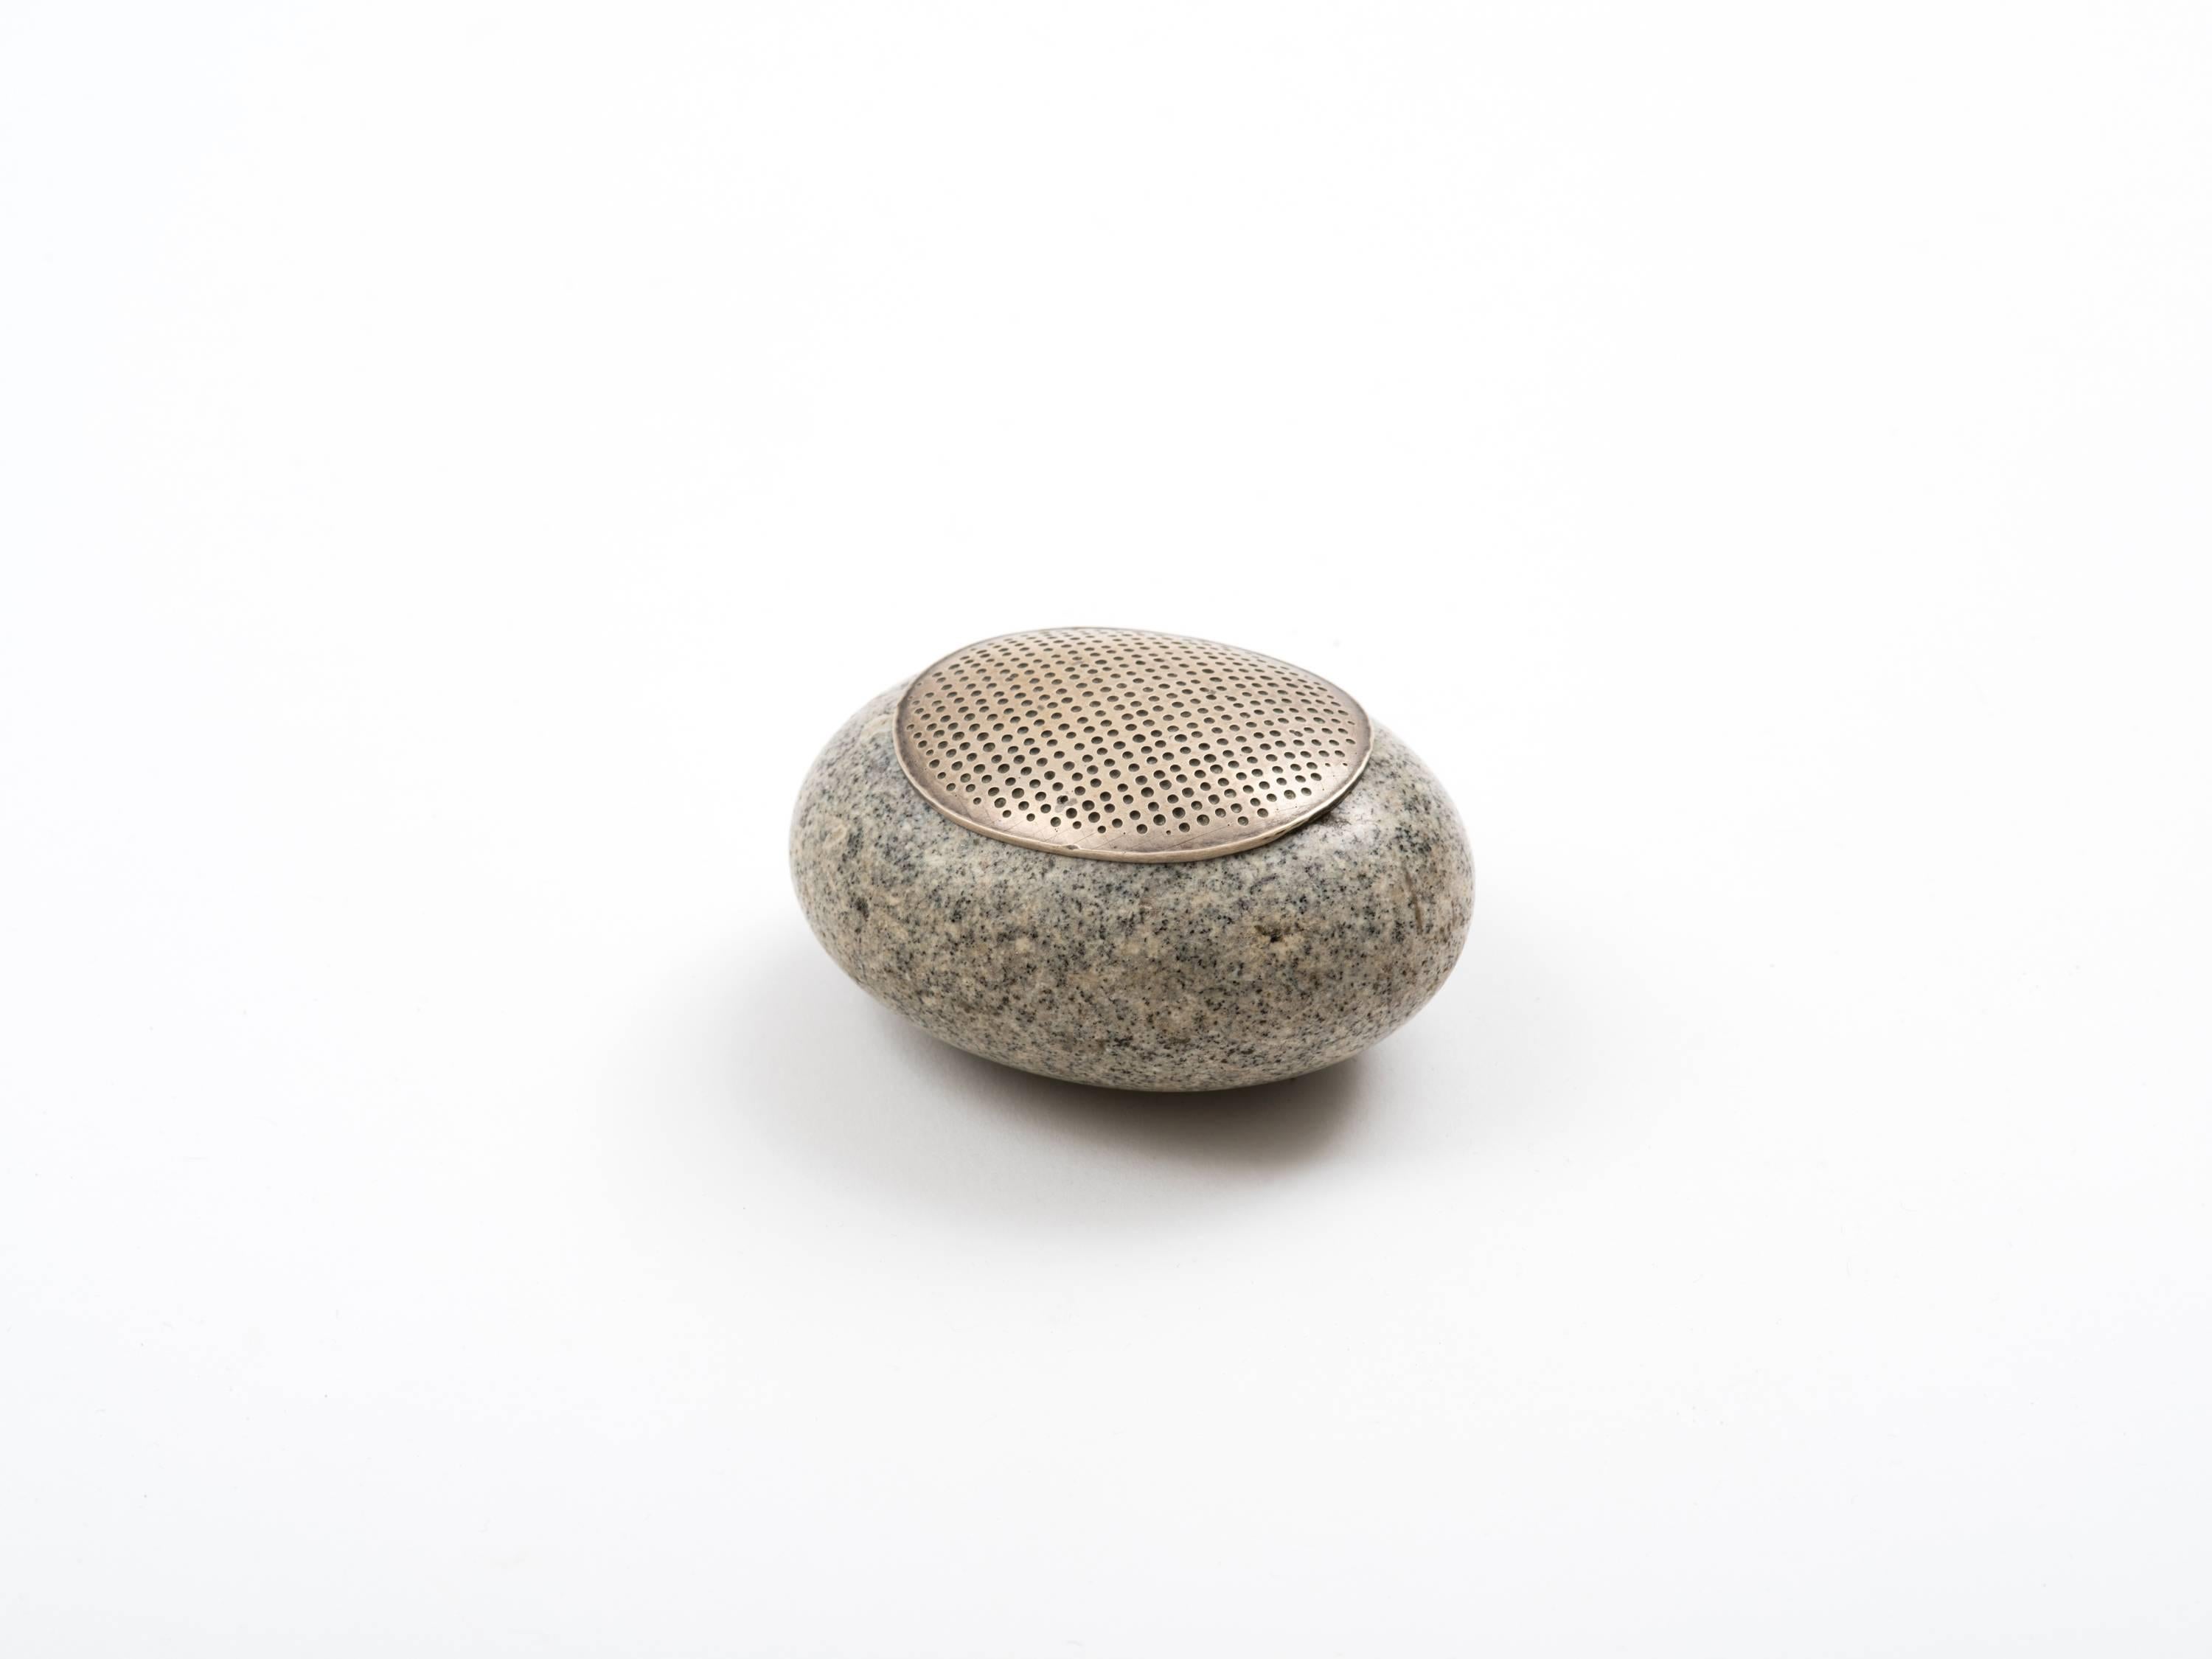 A sublime box handcrafted by American silversmith, John Prip, comprising a hollowed and polished granite river stone inset with rim and finished with a handwrought lid, both in sterling silver. Meticulously executed and thoughtfully designed with